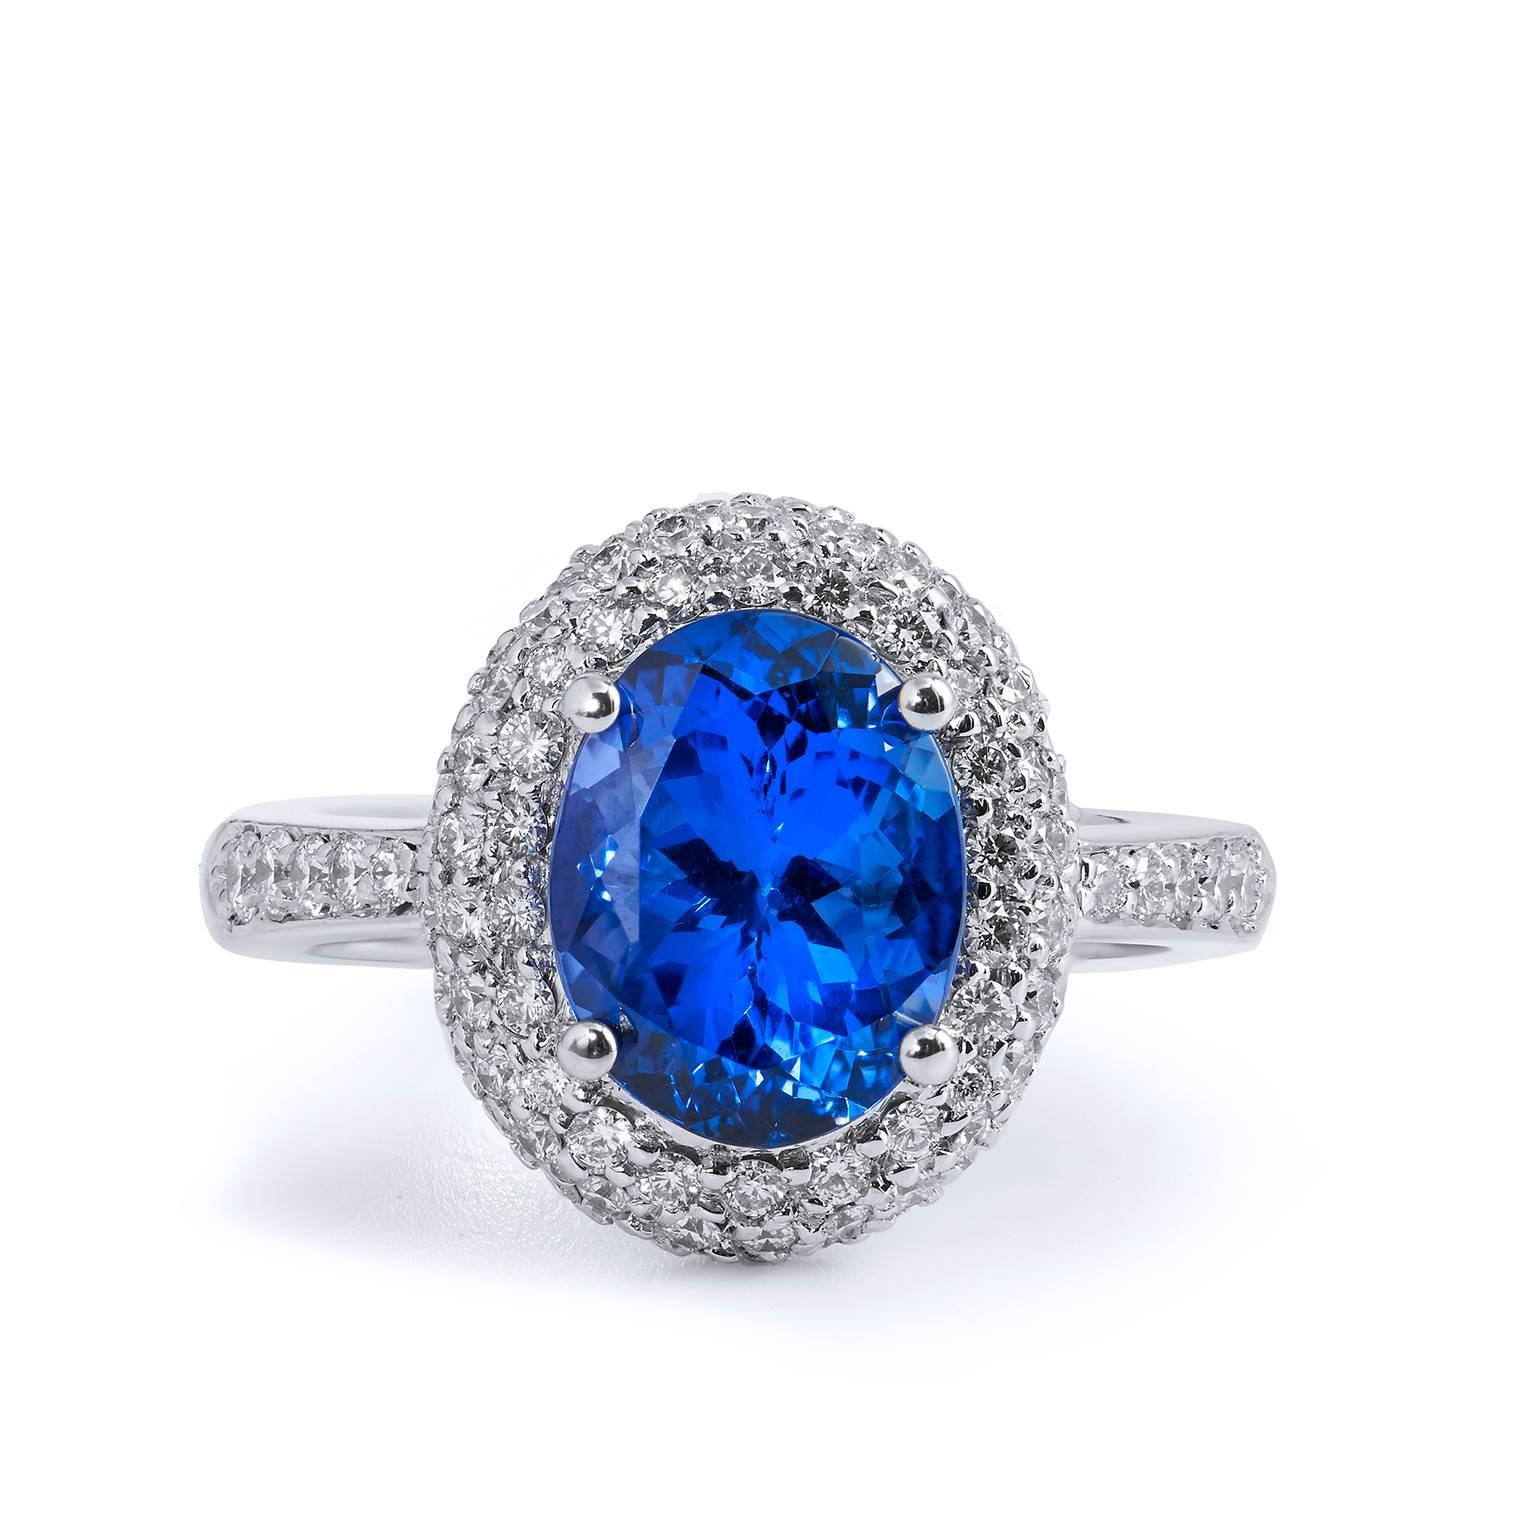 Handmade H&H 3.19 Carat Tanzanite and Diamond 18 karat Gold Ring 

This is a handmade ring by H&H Jewels.  

You will not be able to stop looking at this large and bright vivid blue 3.19 carat oval fine cut Tanzanite that is handcrafted in 18 karat